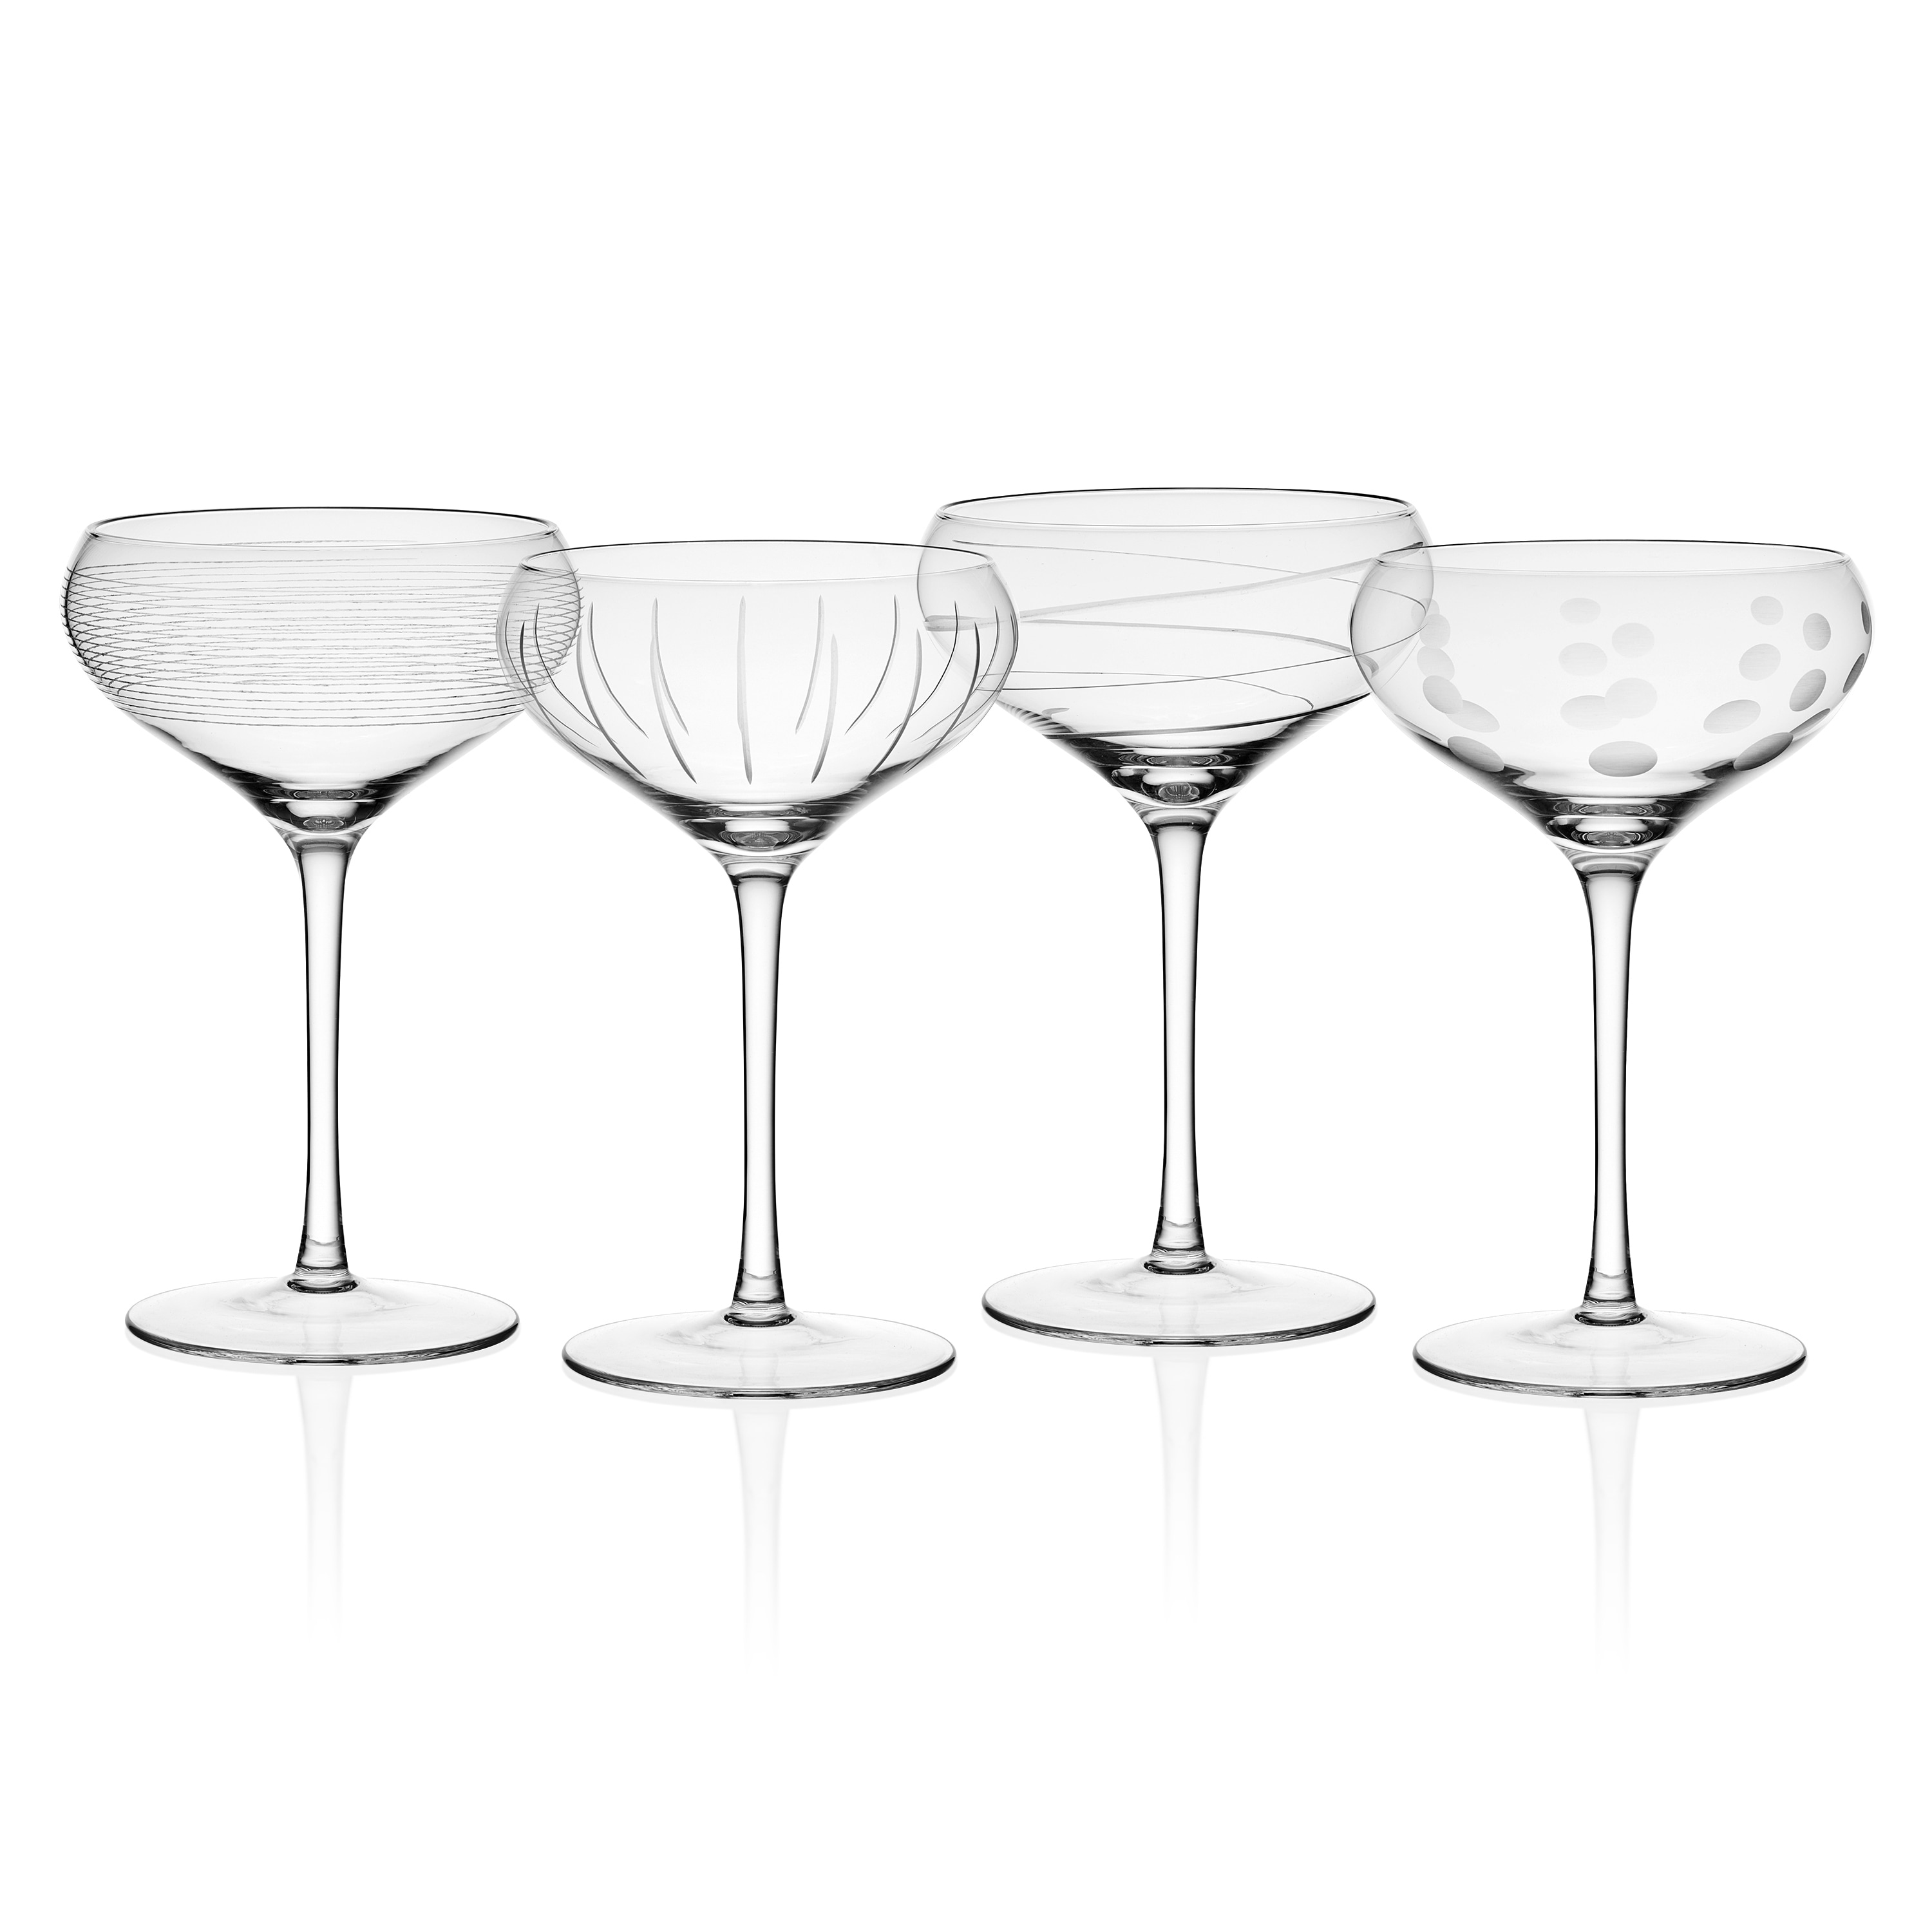 https://ak1.ostkcdn.com/images/products/is/images/direct/0e991e84d78d02217d450f427497327ce41cbdbf/Mikasa-Cheers-15OZ-Coupe-Cocktail-Glass%2C-Set-of-4.jpg